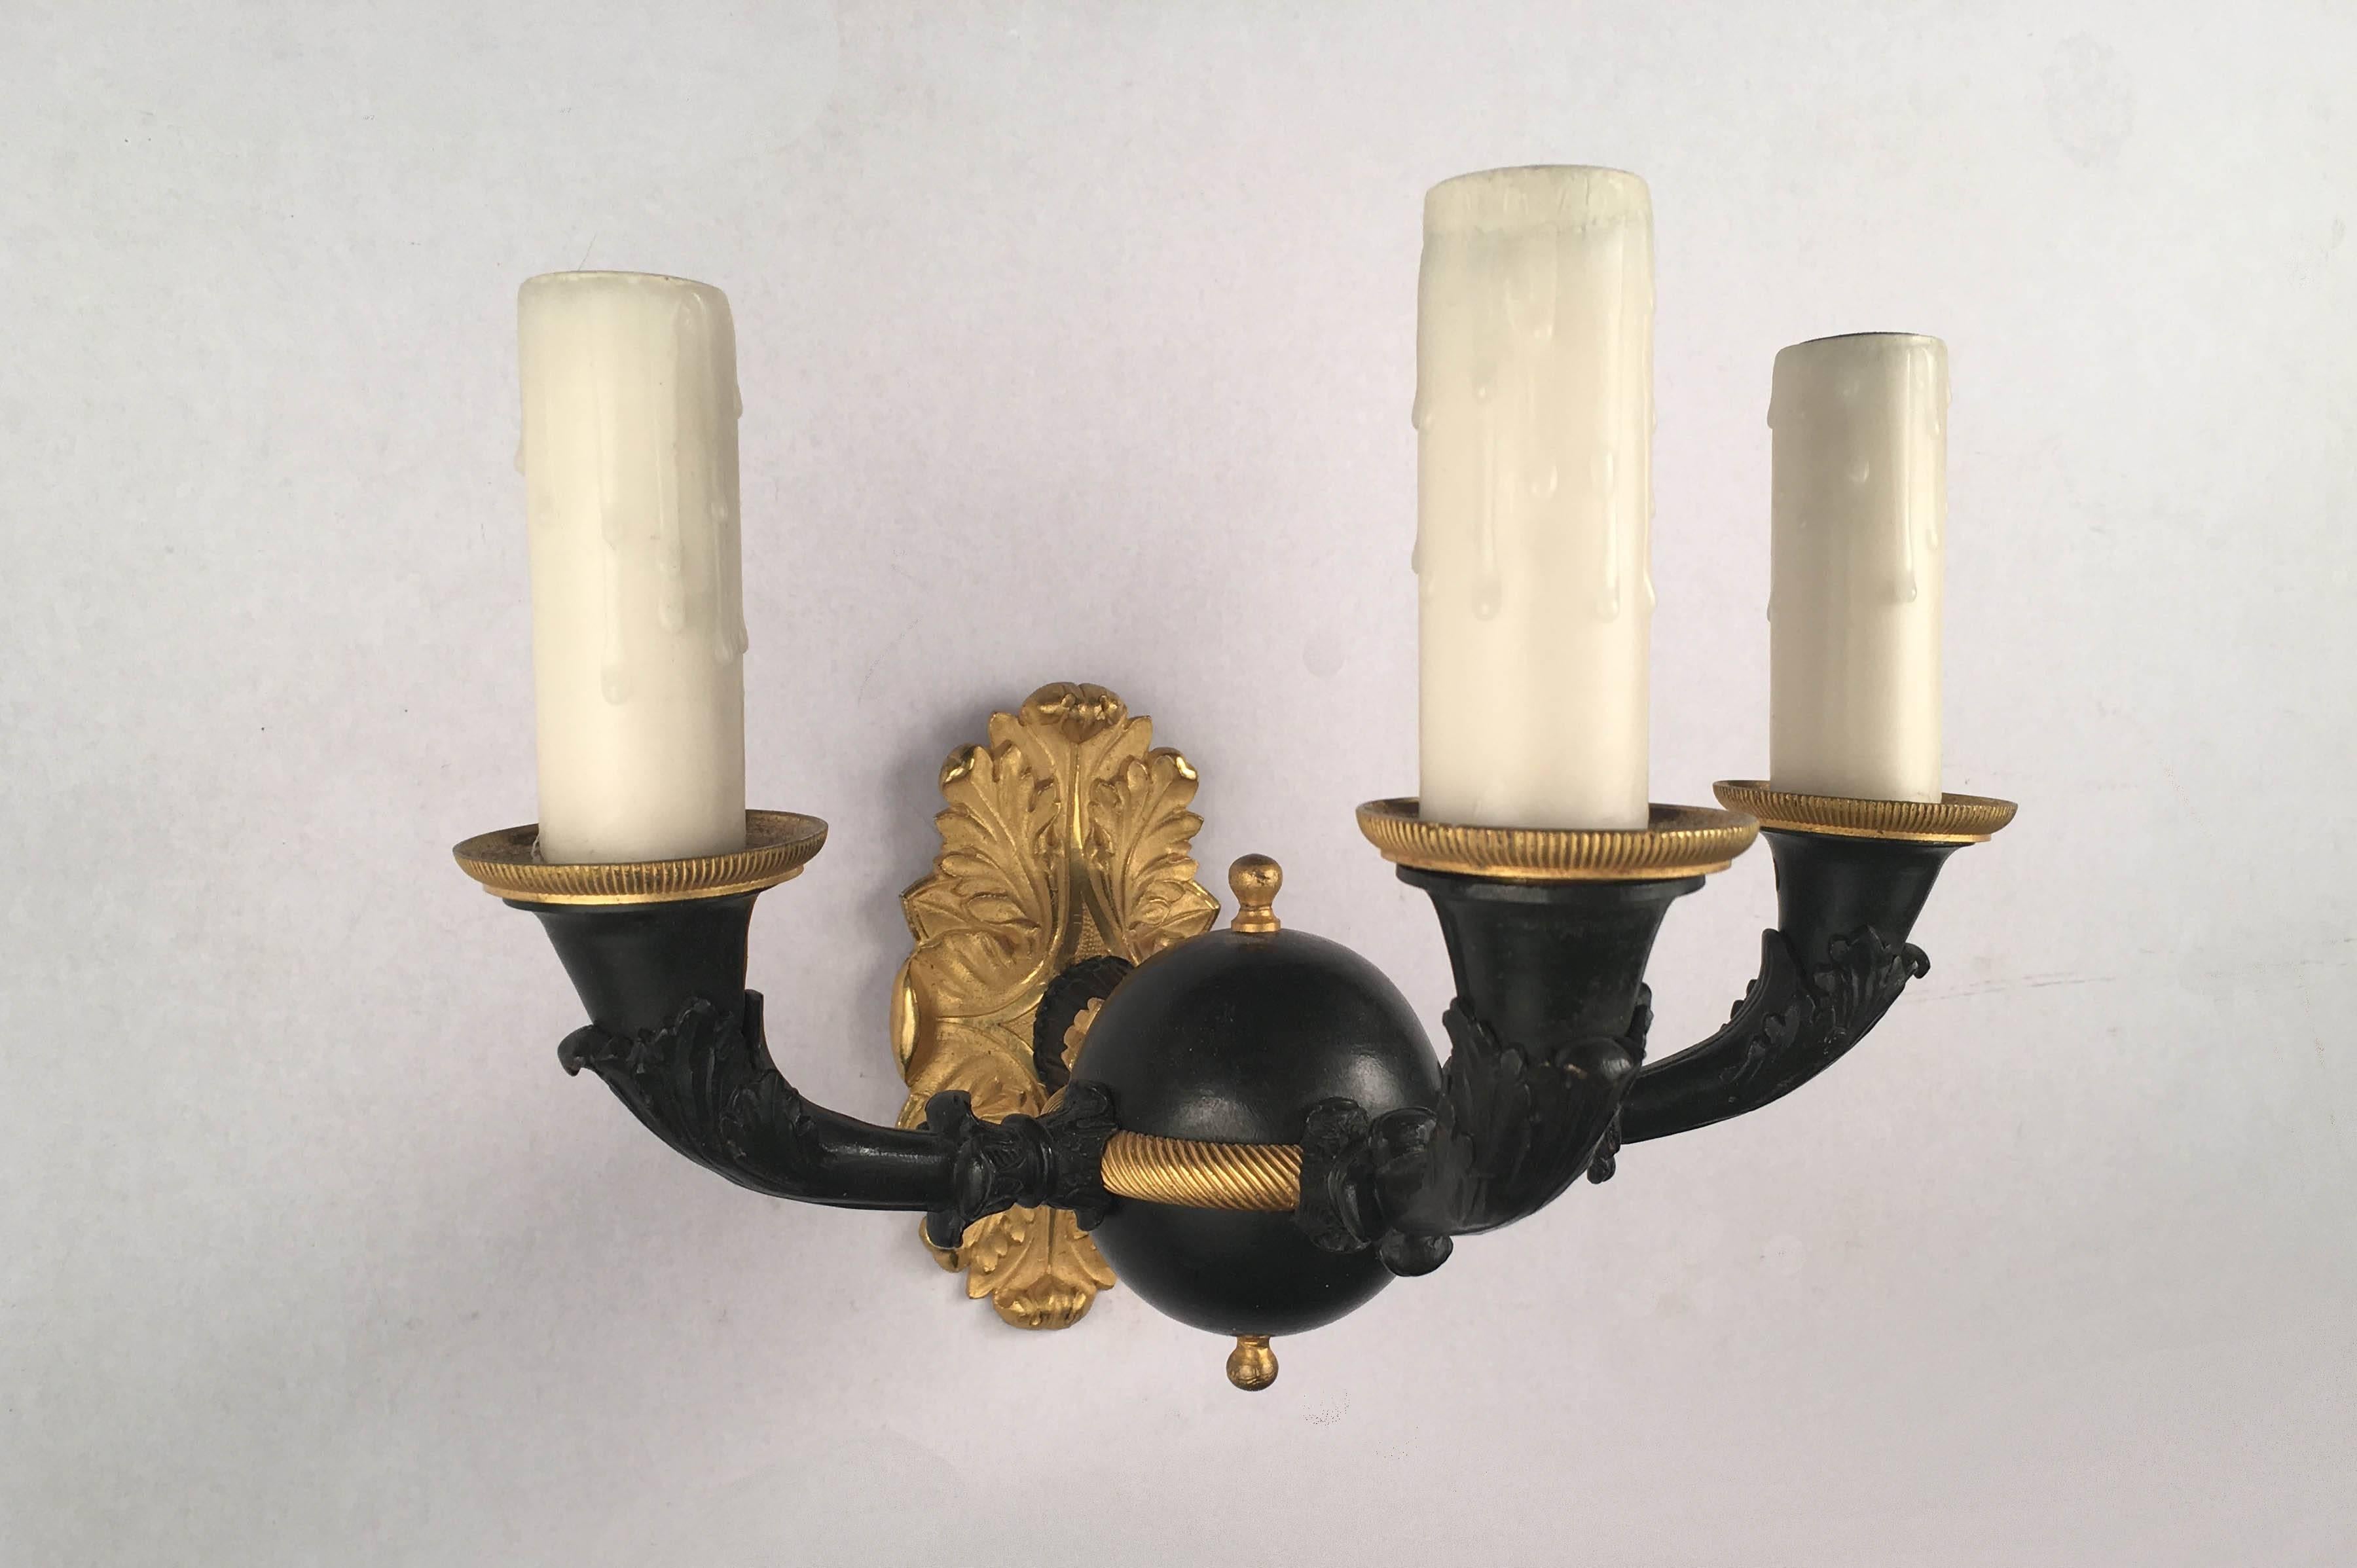 Blackened Set of Four Empire Style Three-Light Wall Sconces, Gilt and Patinated